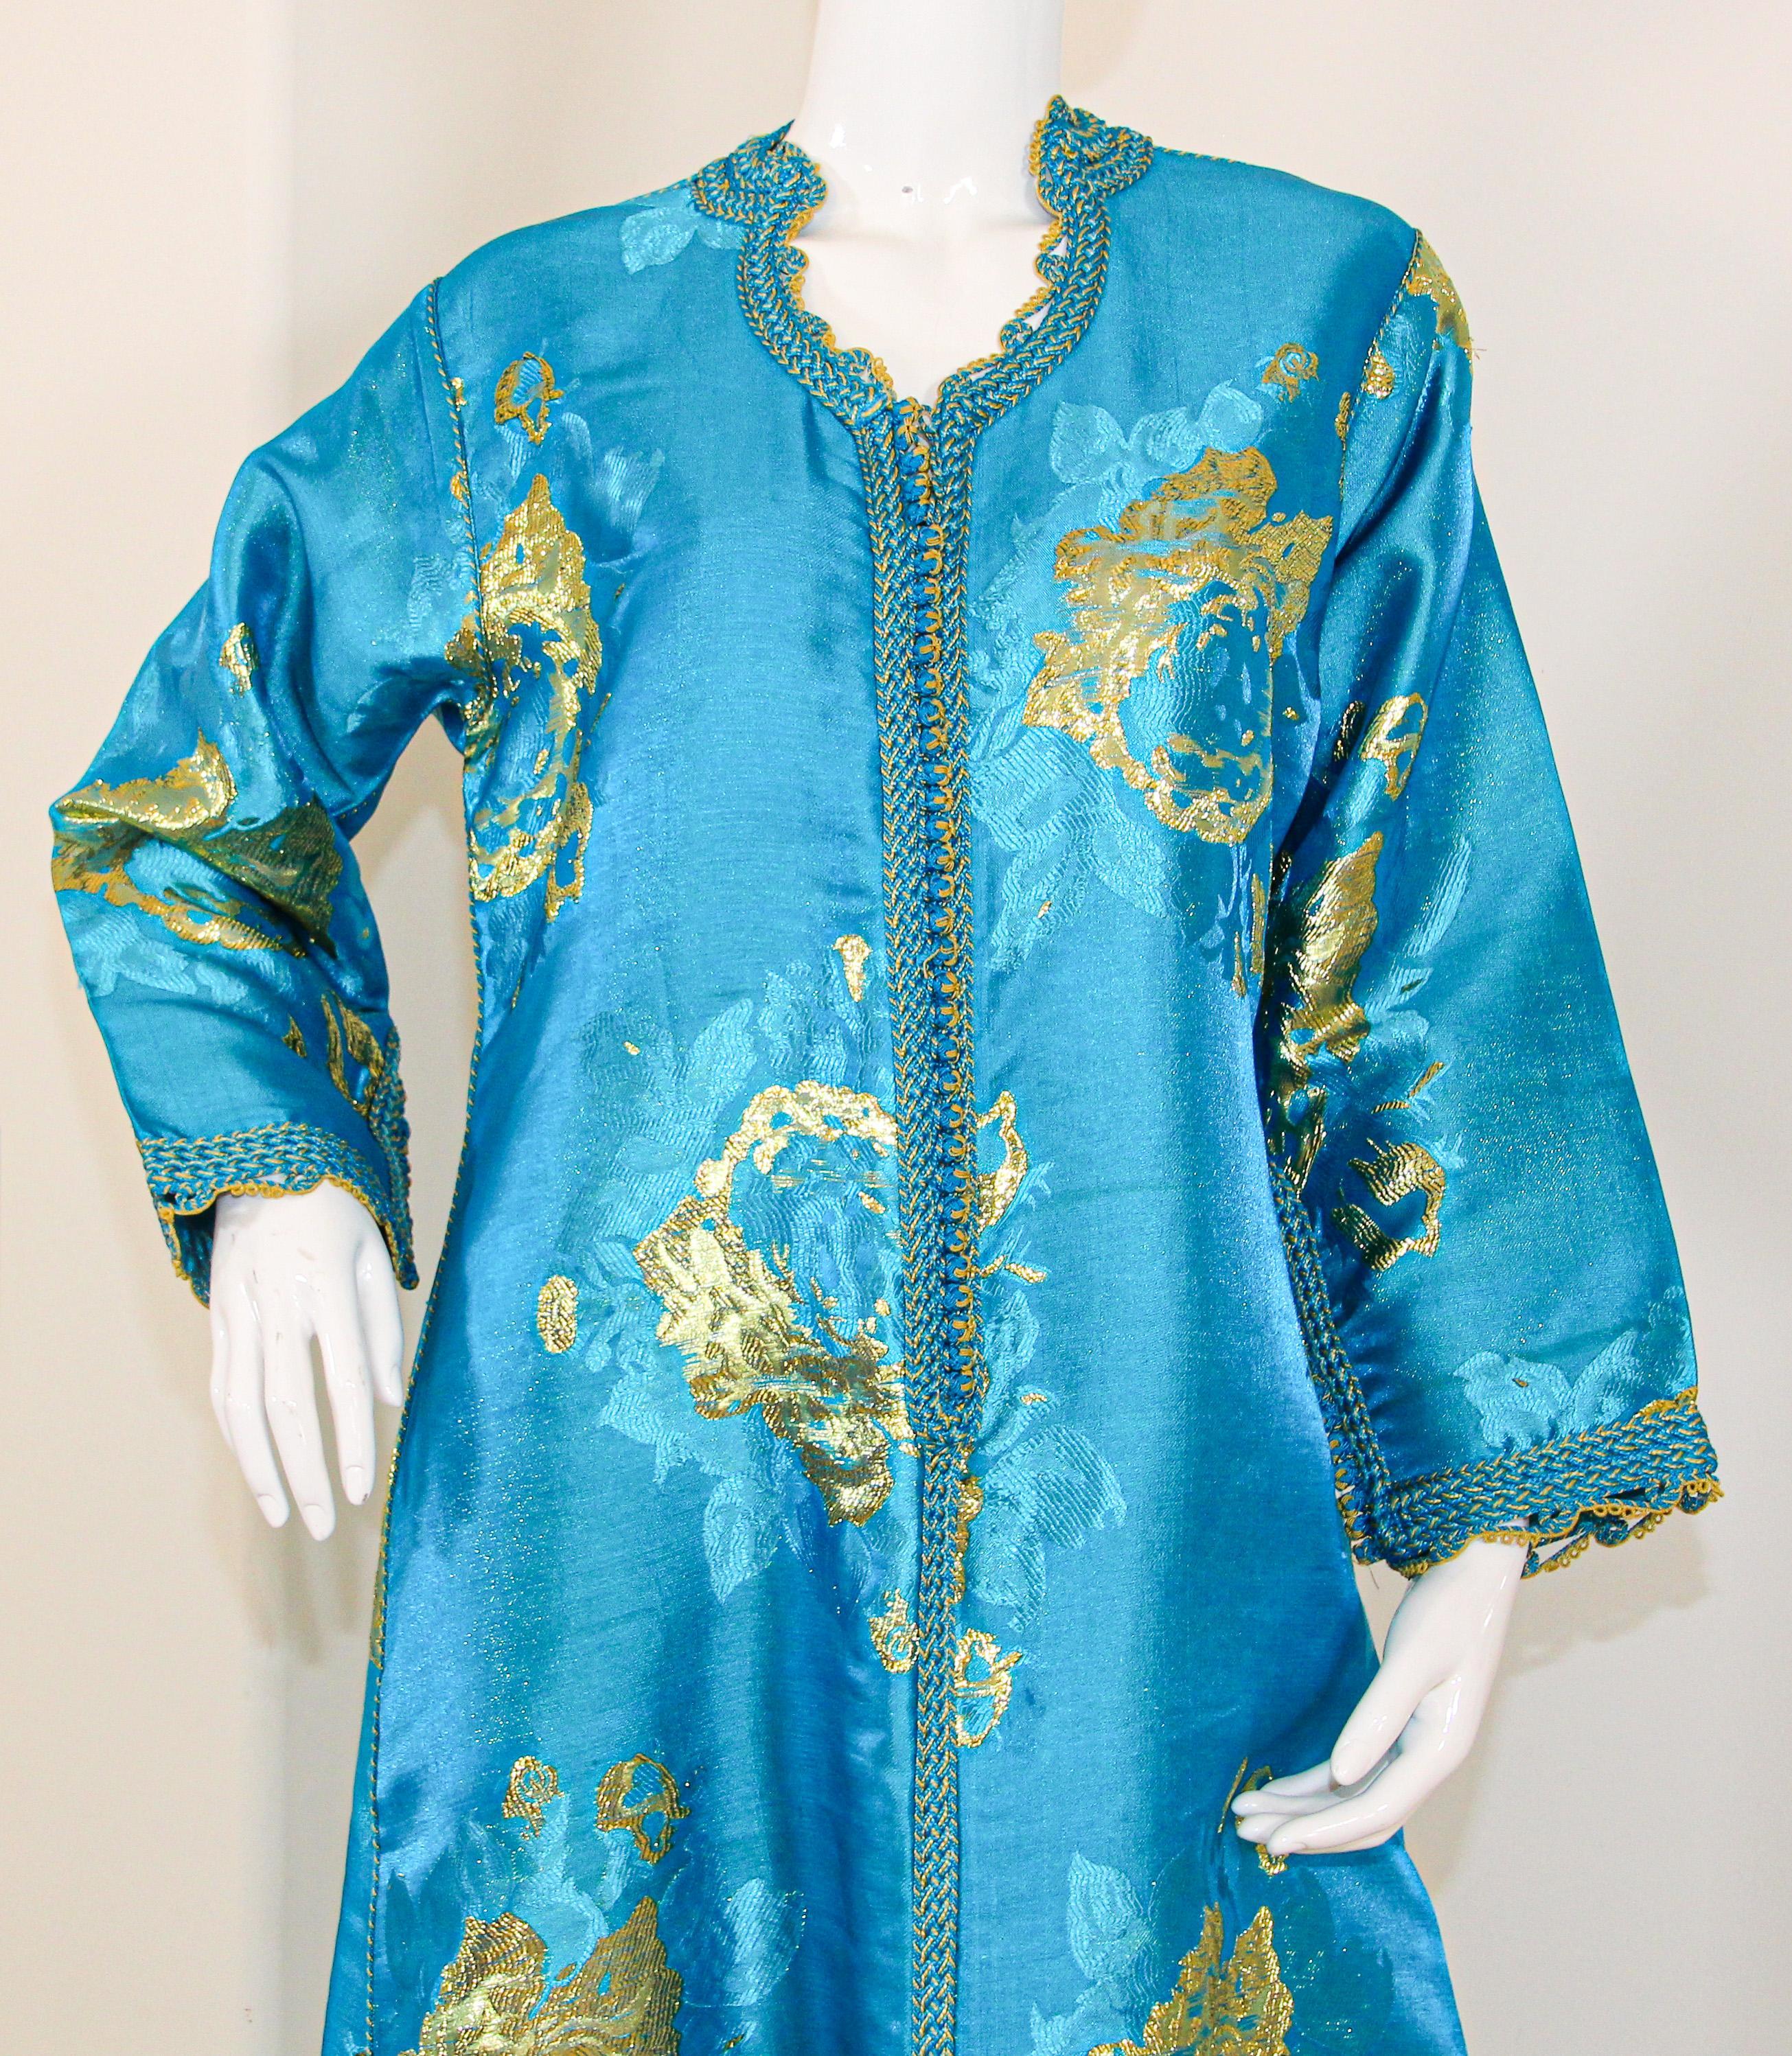 Moroccan Kaftan in Turquoise and Gold Floral Brocade Metallic Lame 10